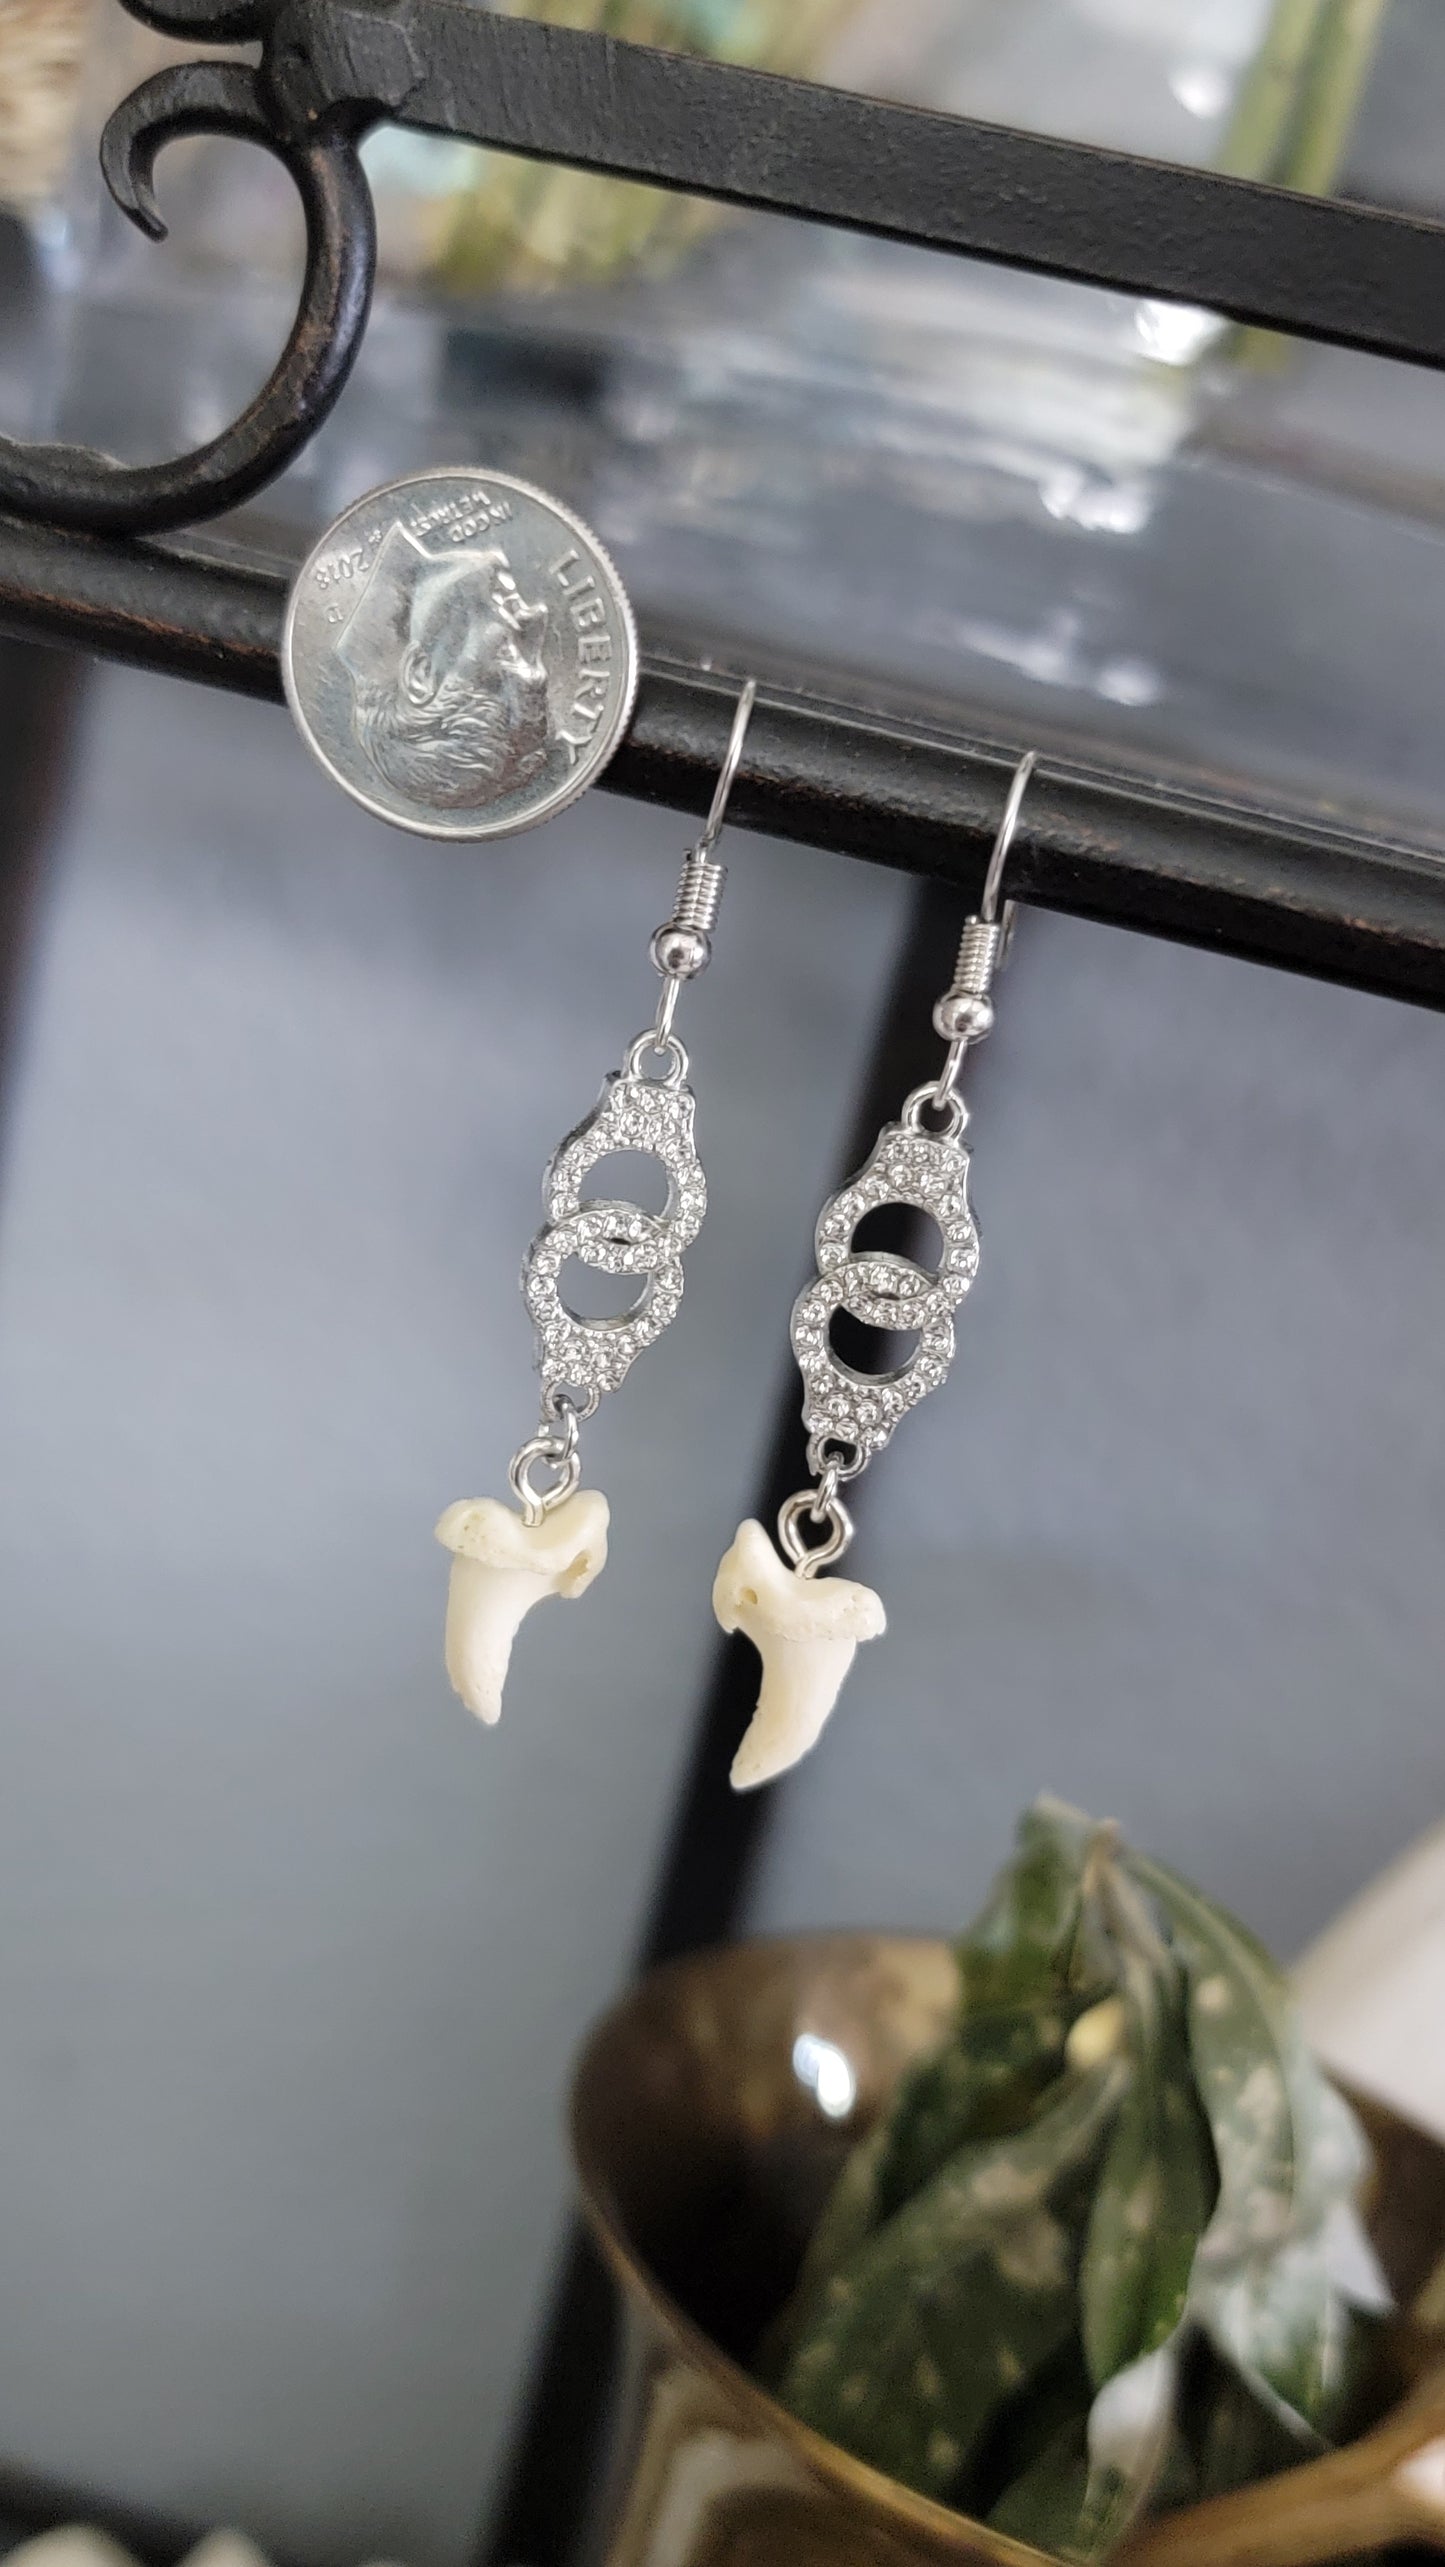 Sparkly Cuffs with Coyote Toe Bone Earrings